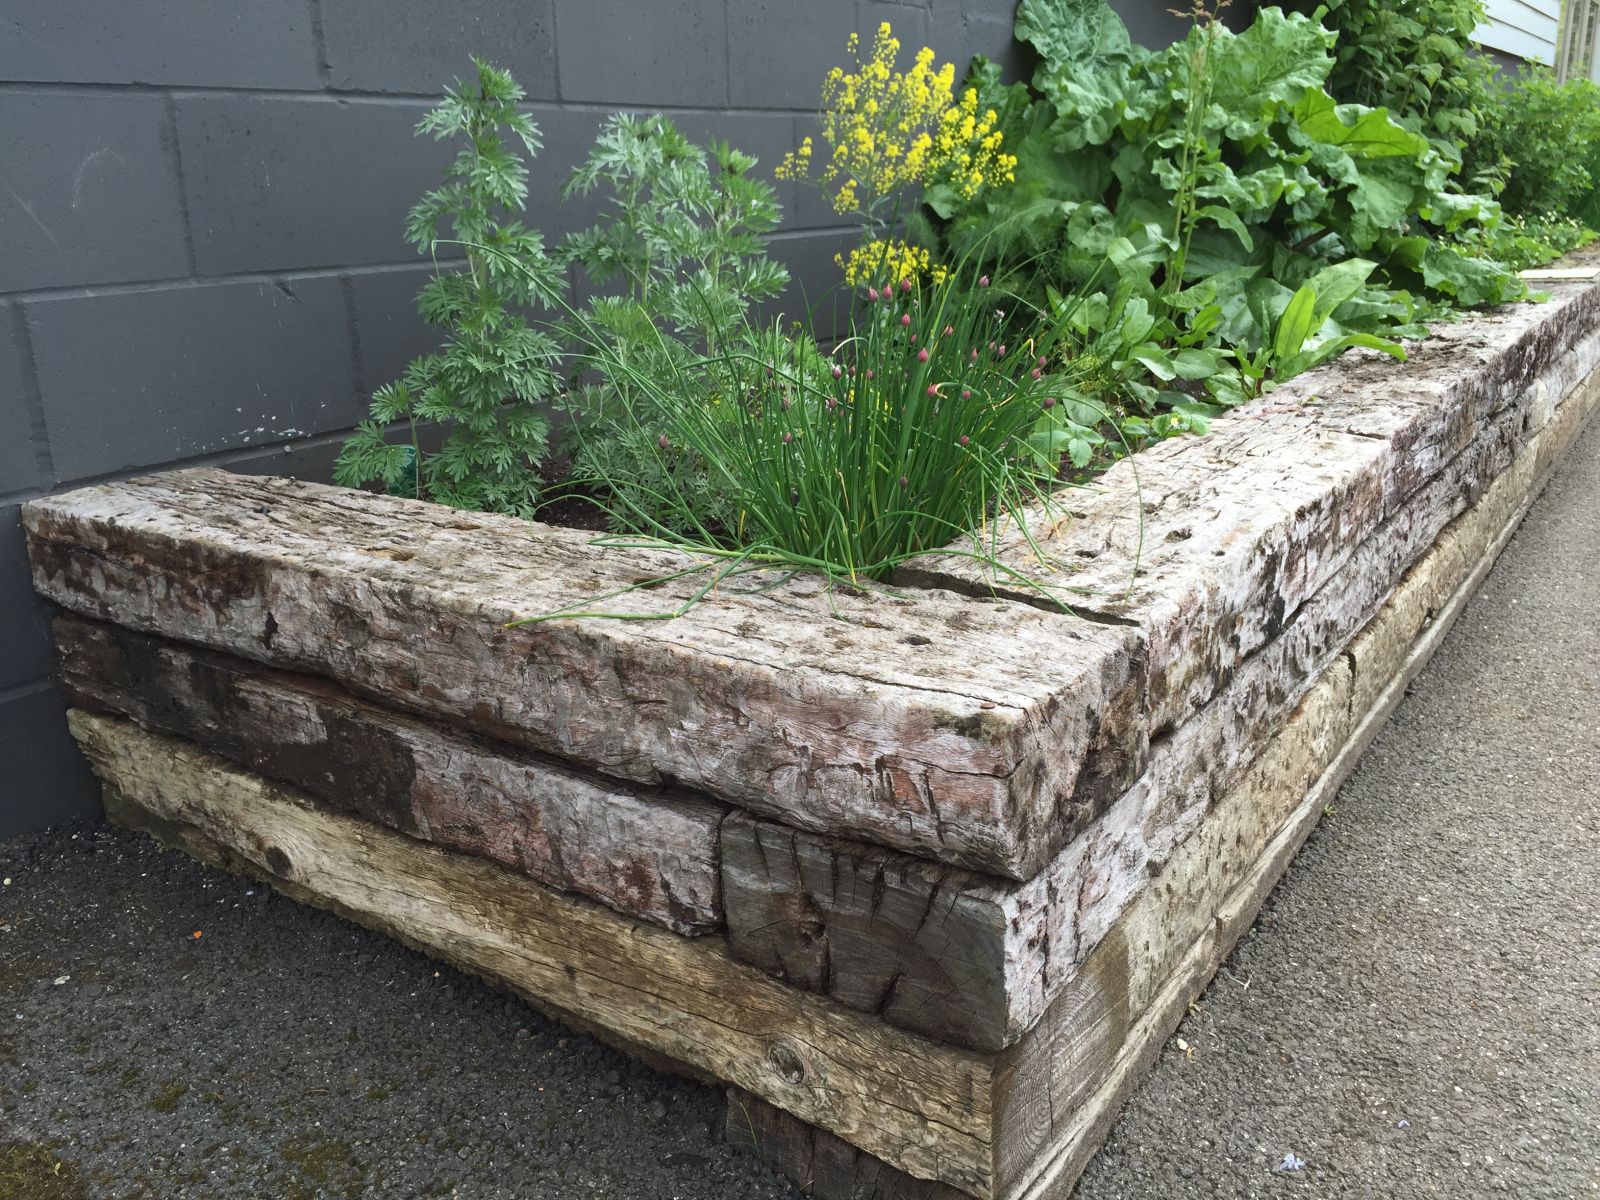 Railway sleepers stacked on top of each other to build a raised planter. Railwaysleepers.com